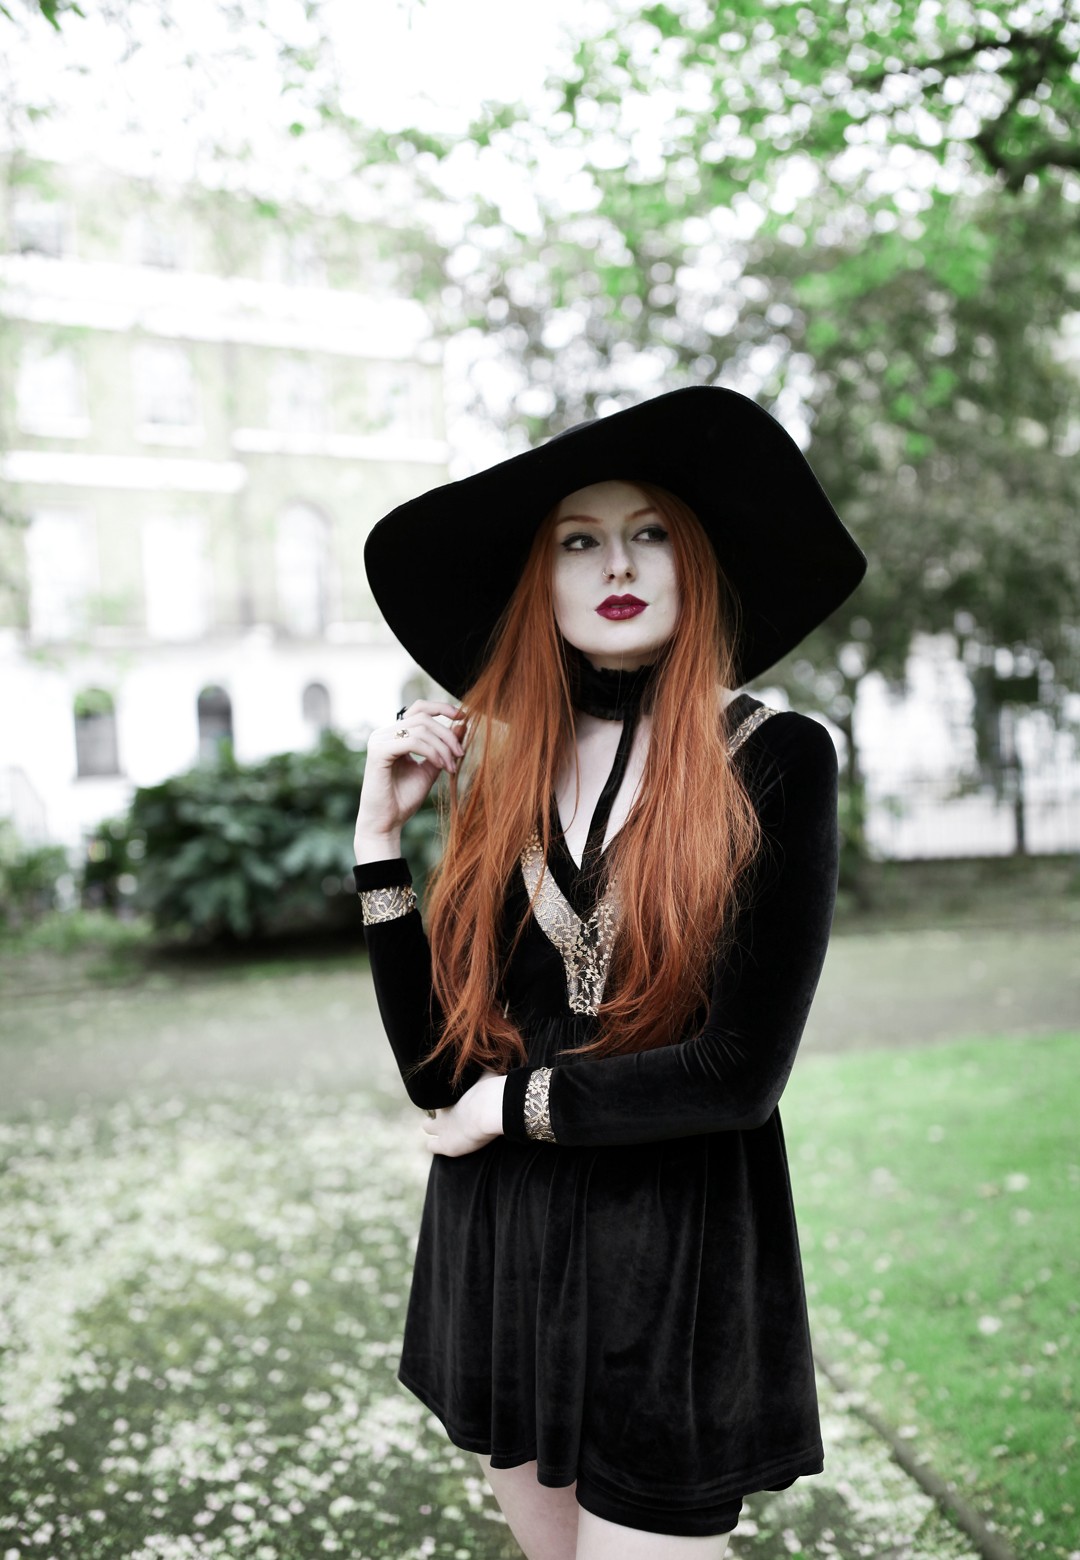 Olivia Emily wears Dark Thorn Clothing Victoria Dress, Asos Floppy Wide Brim Hat, Rogue and Wolf Jewellery, and Ash Boots